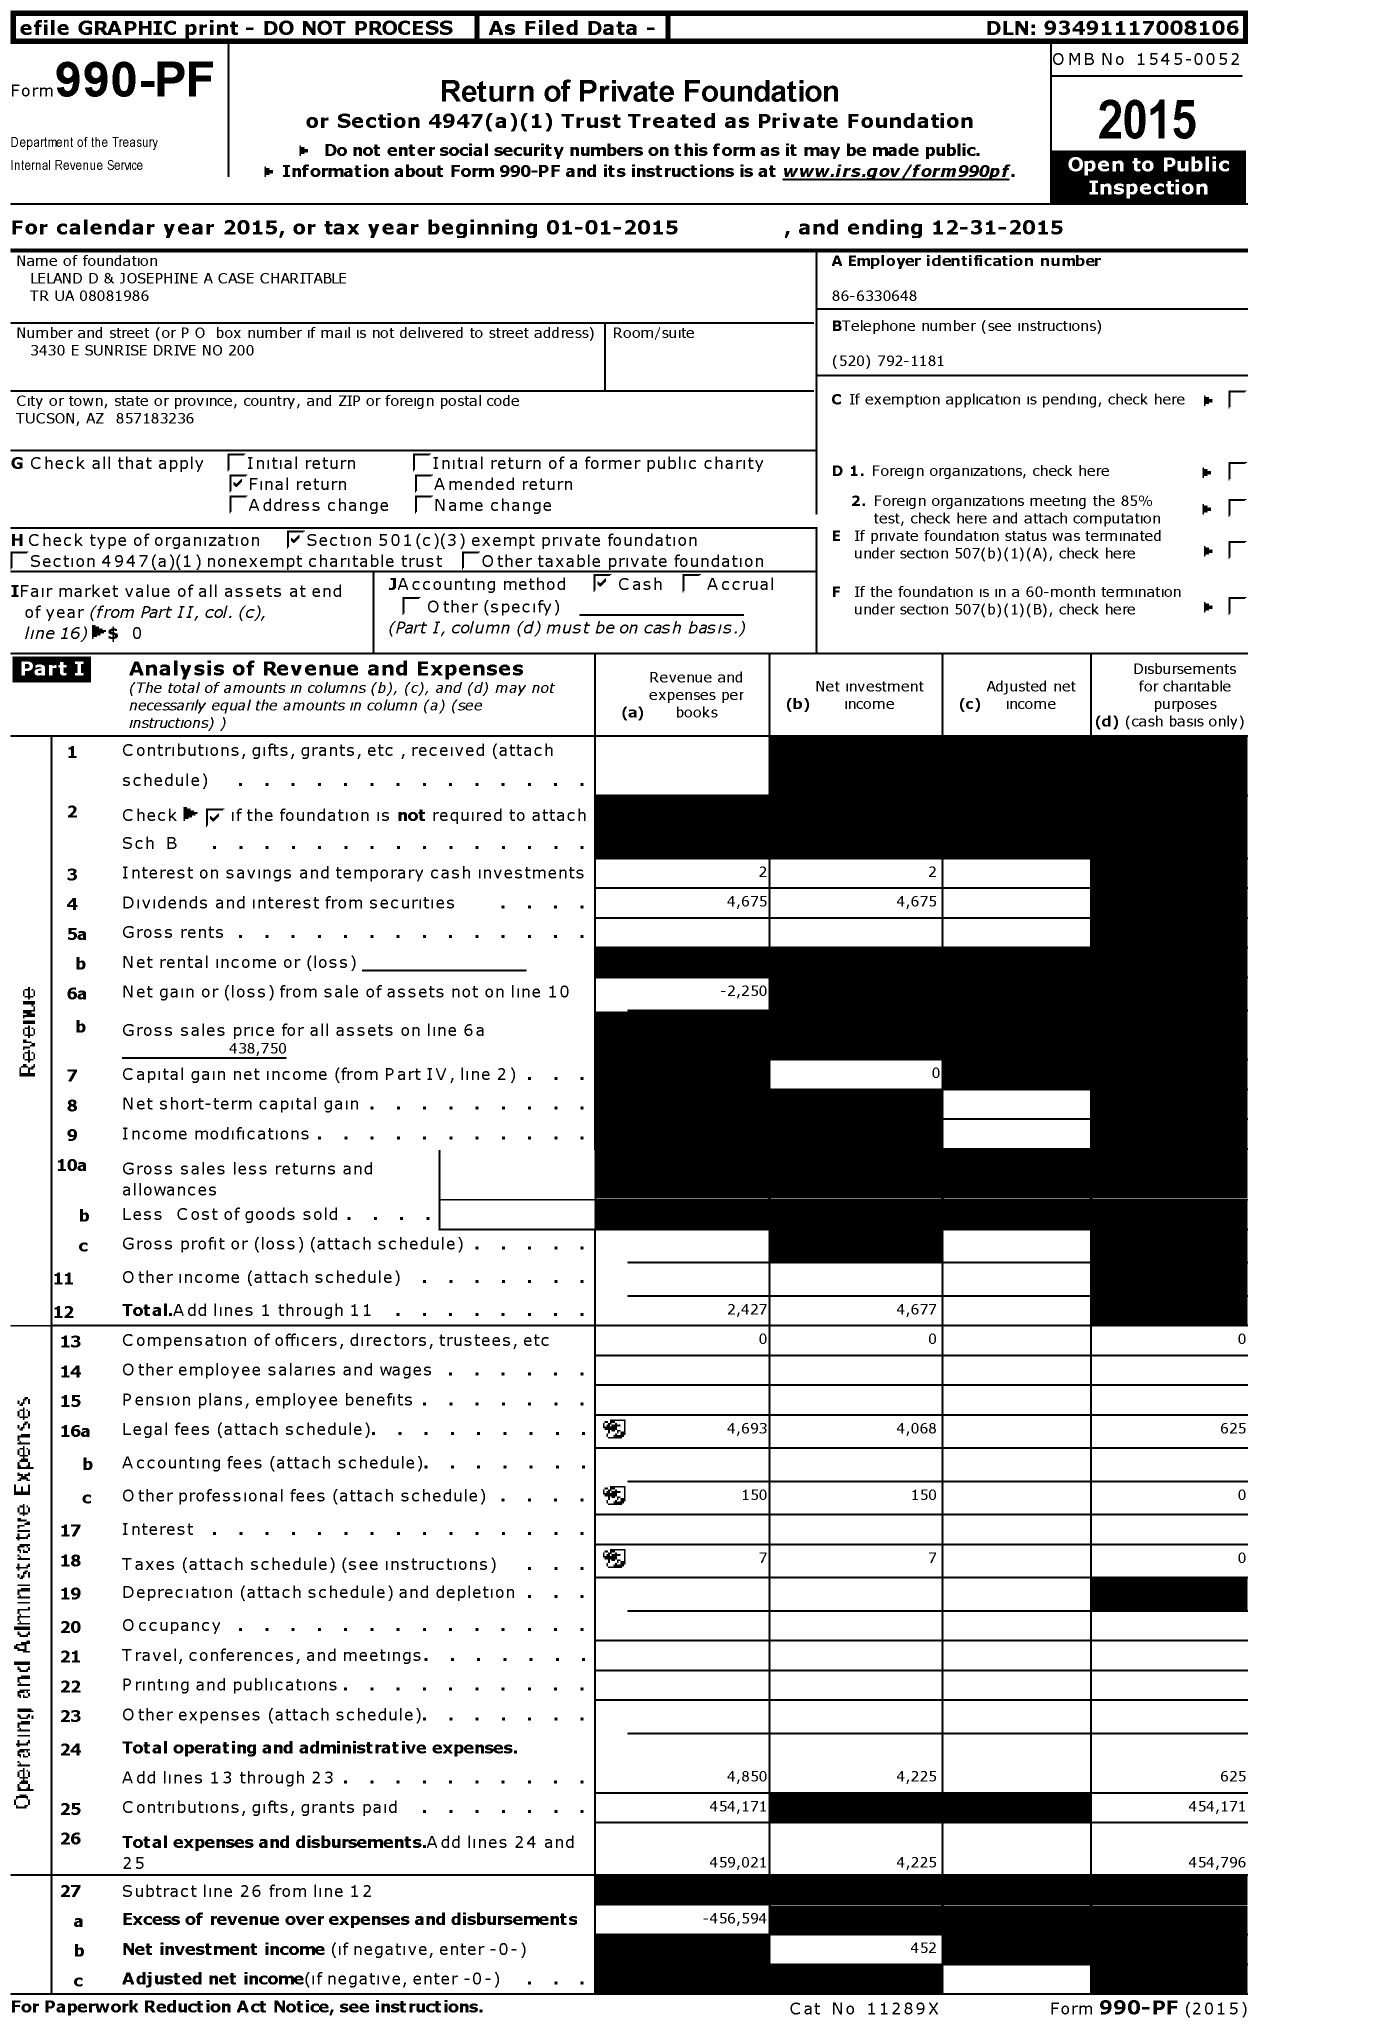 Image of first page of 2015 Form 990PF for Leland D and Josephine A Case Charitable TR 08081986